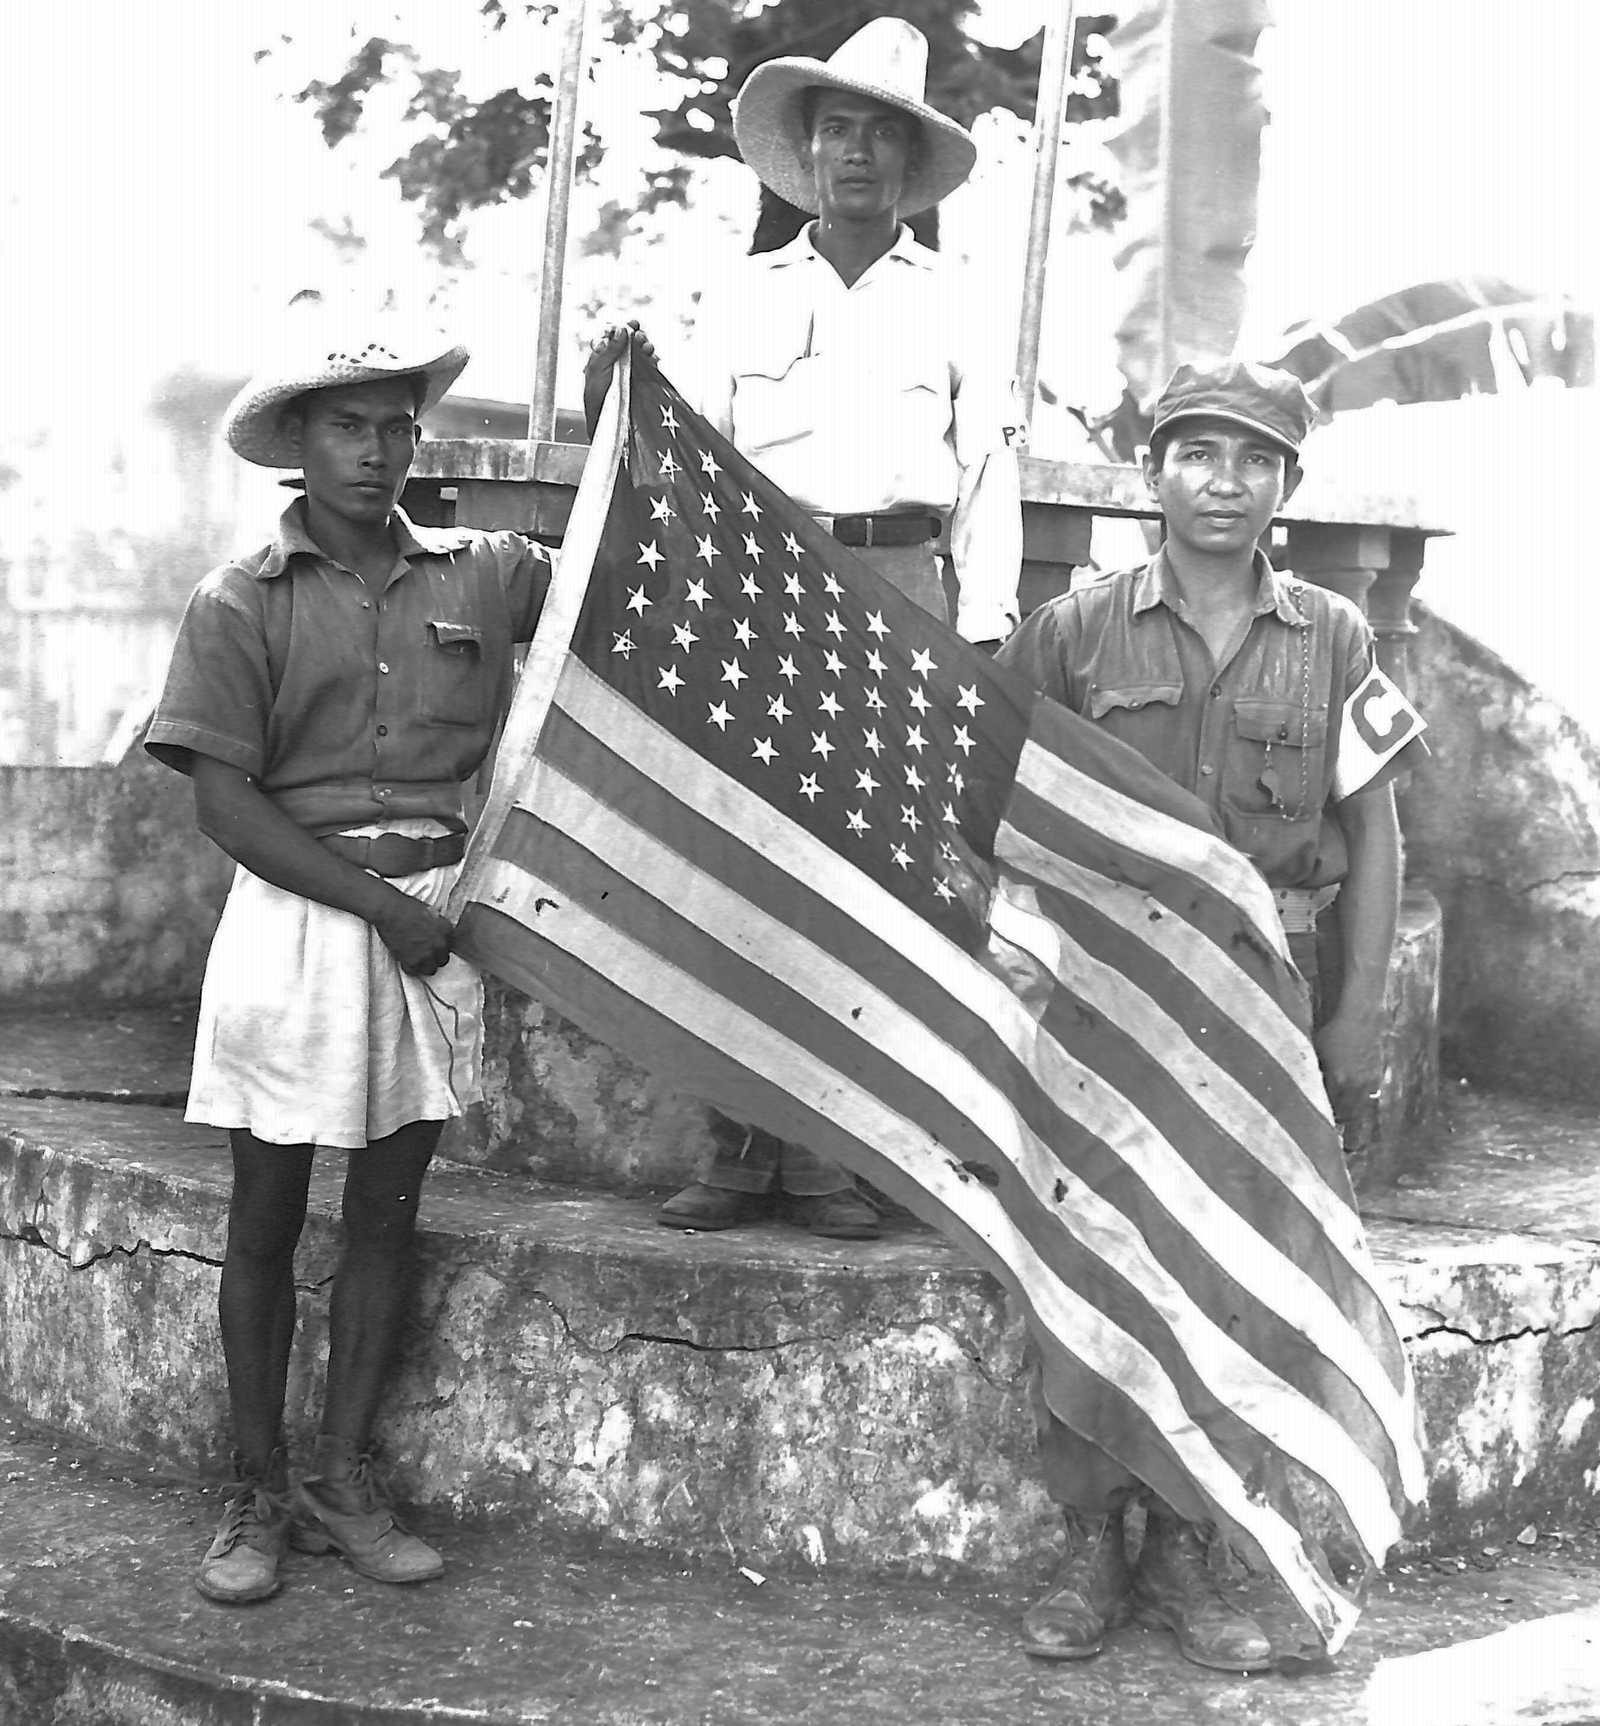 Filipino Guerrilla soldiers holding the American flag